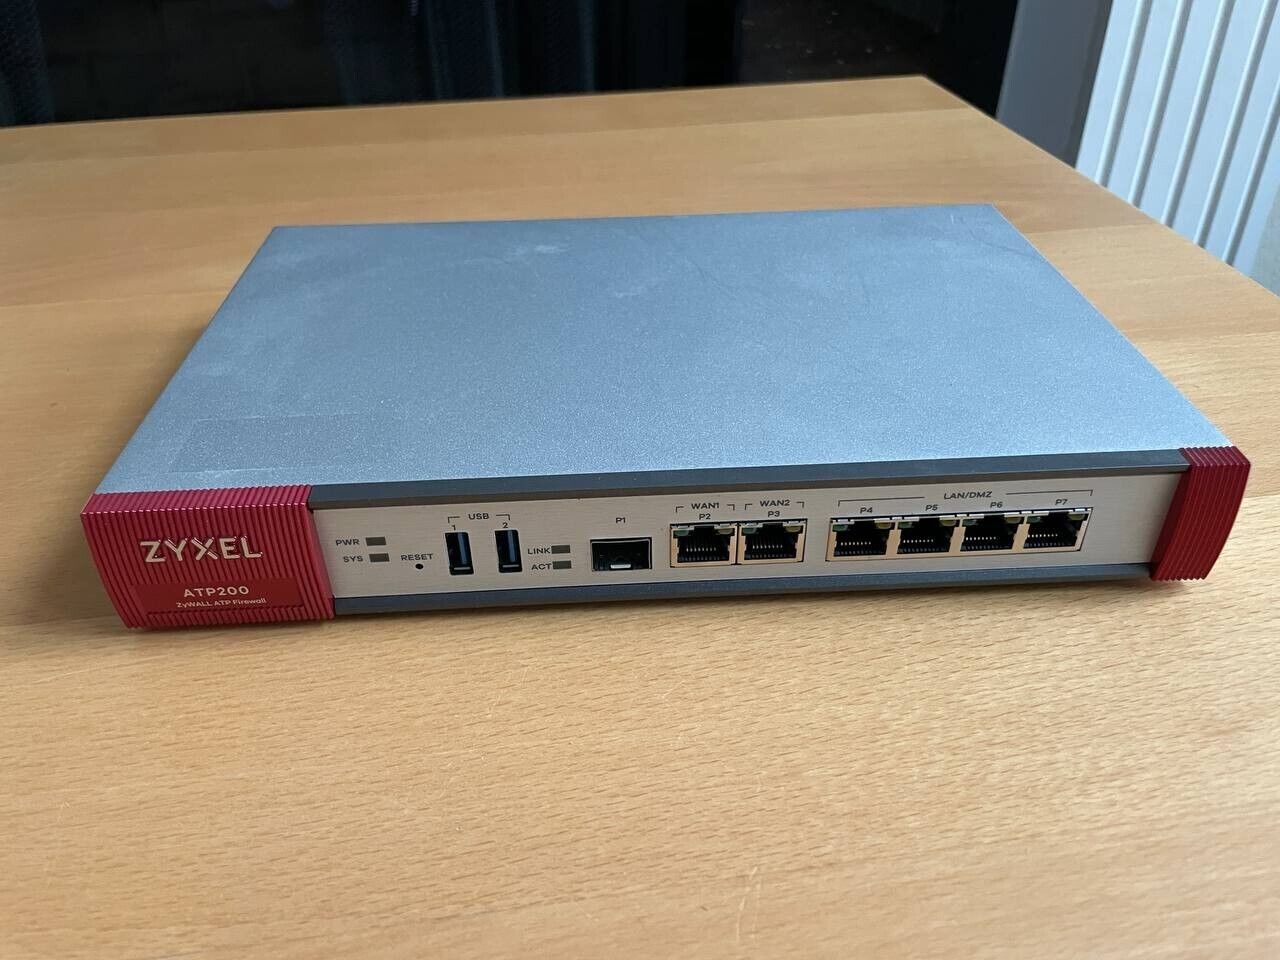 Zyxel ATP200 Firewall for Office